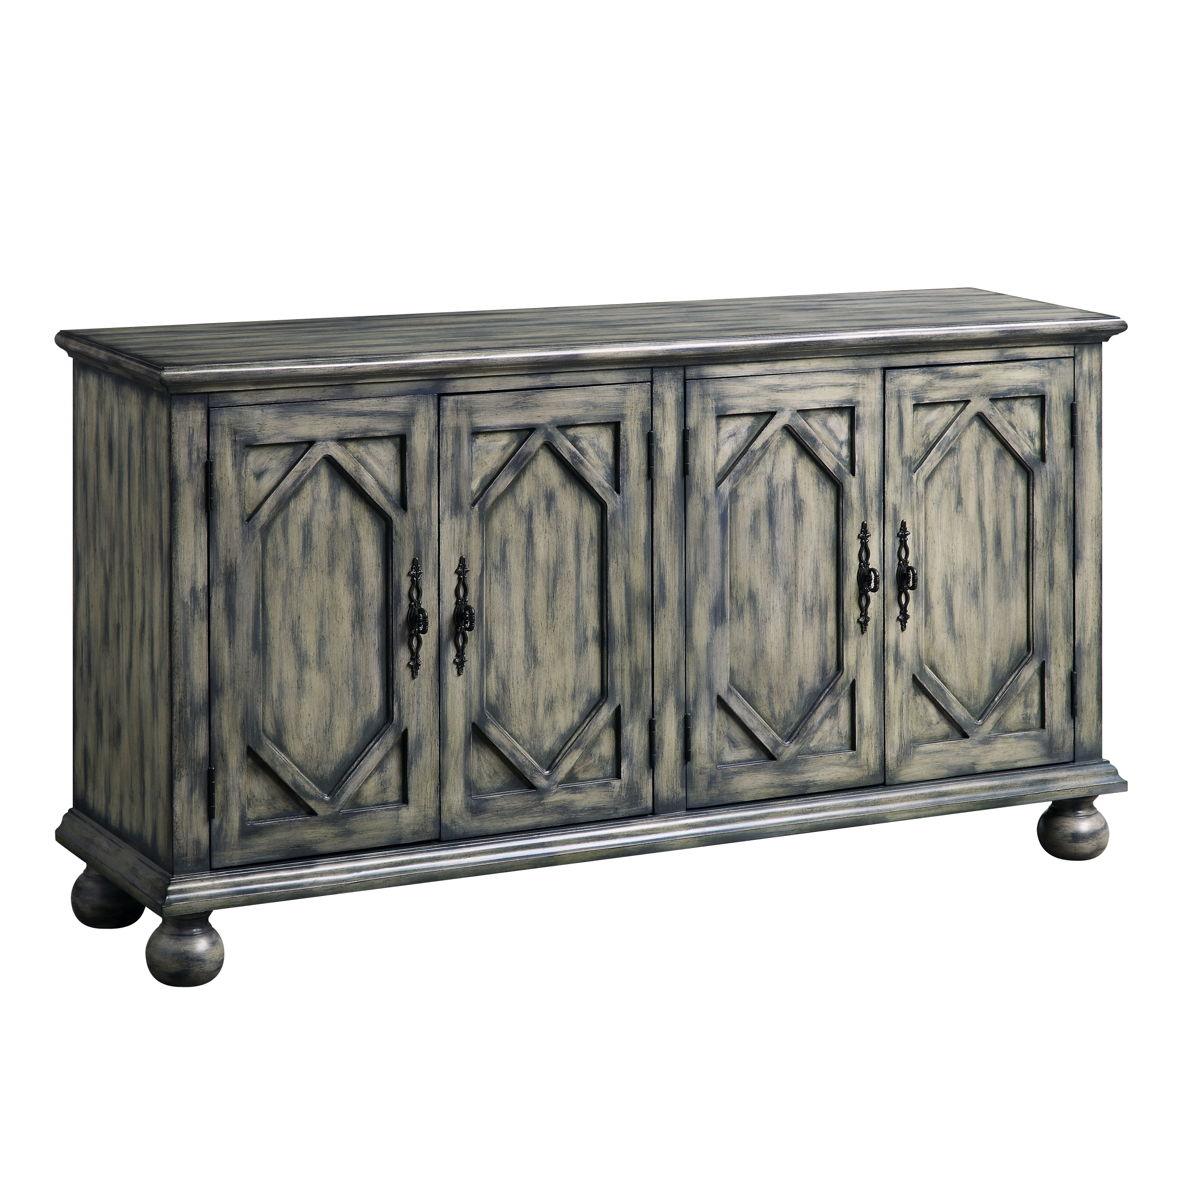 ACME - Pavan - Accent Table - Rustic Gray - 5th Avenue Furniture